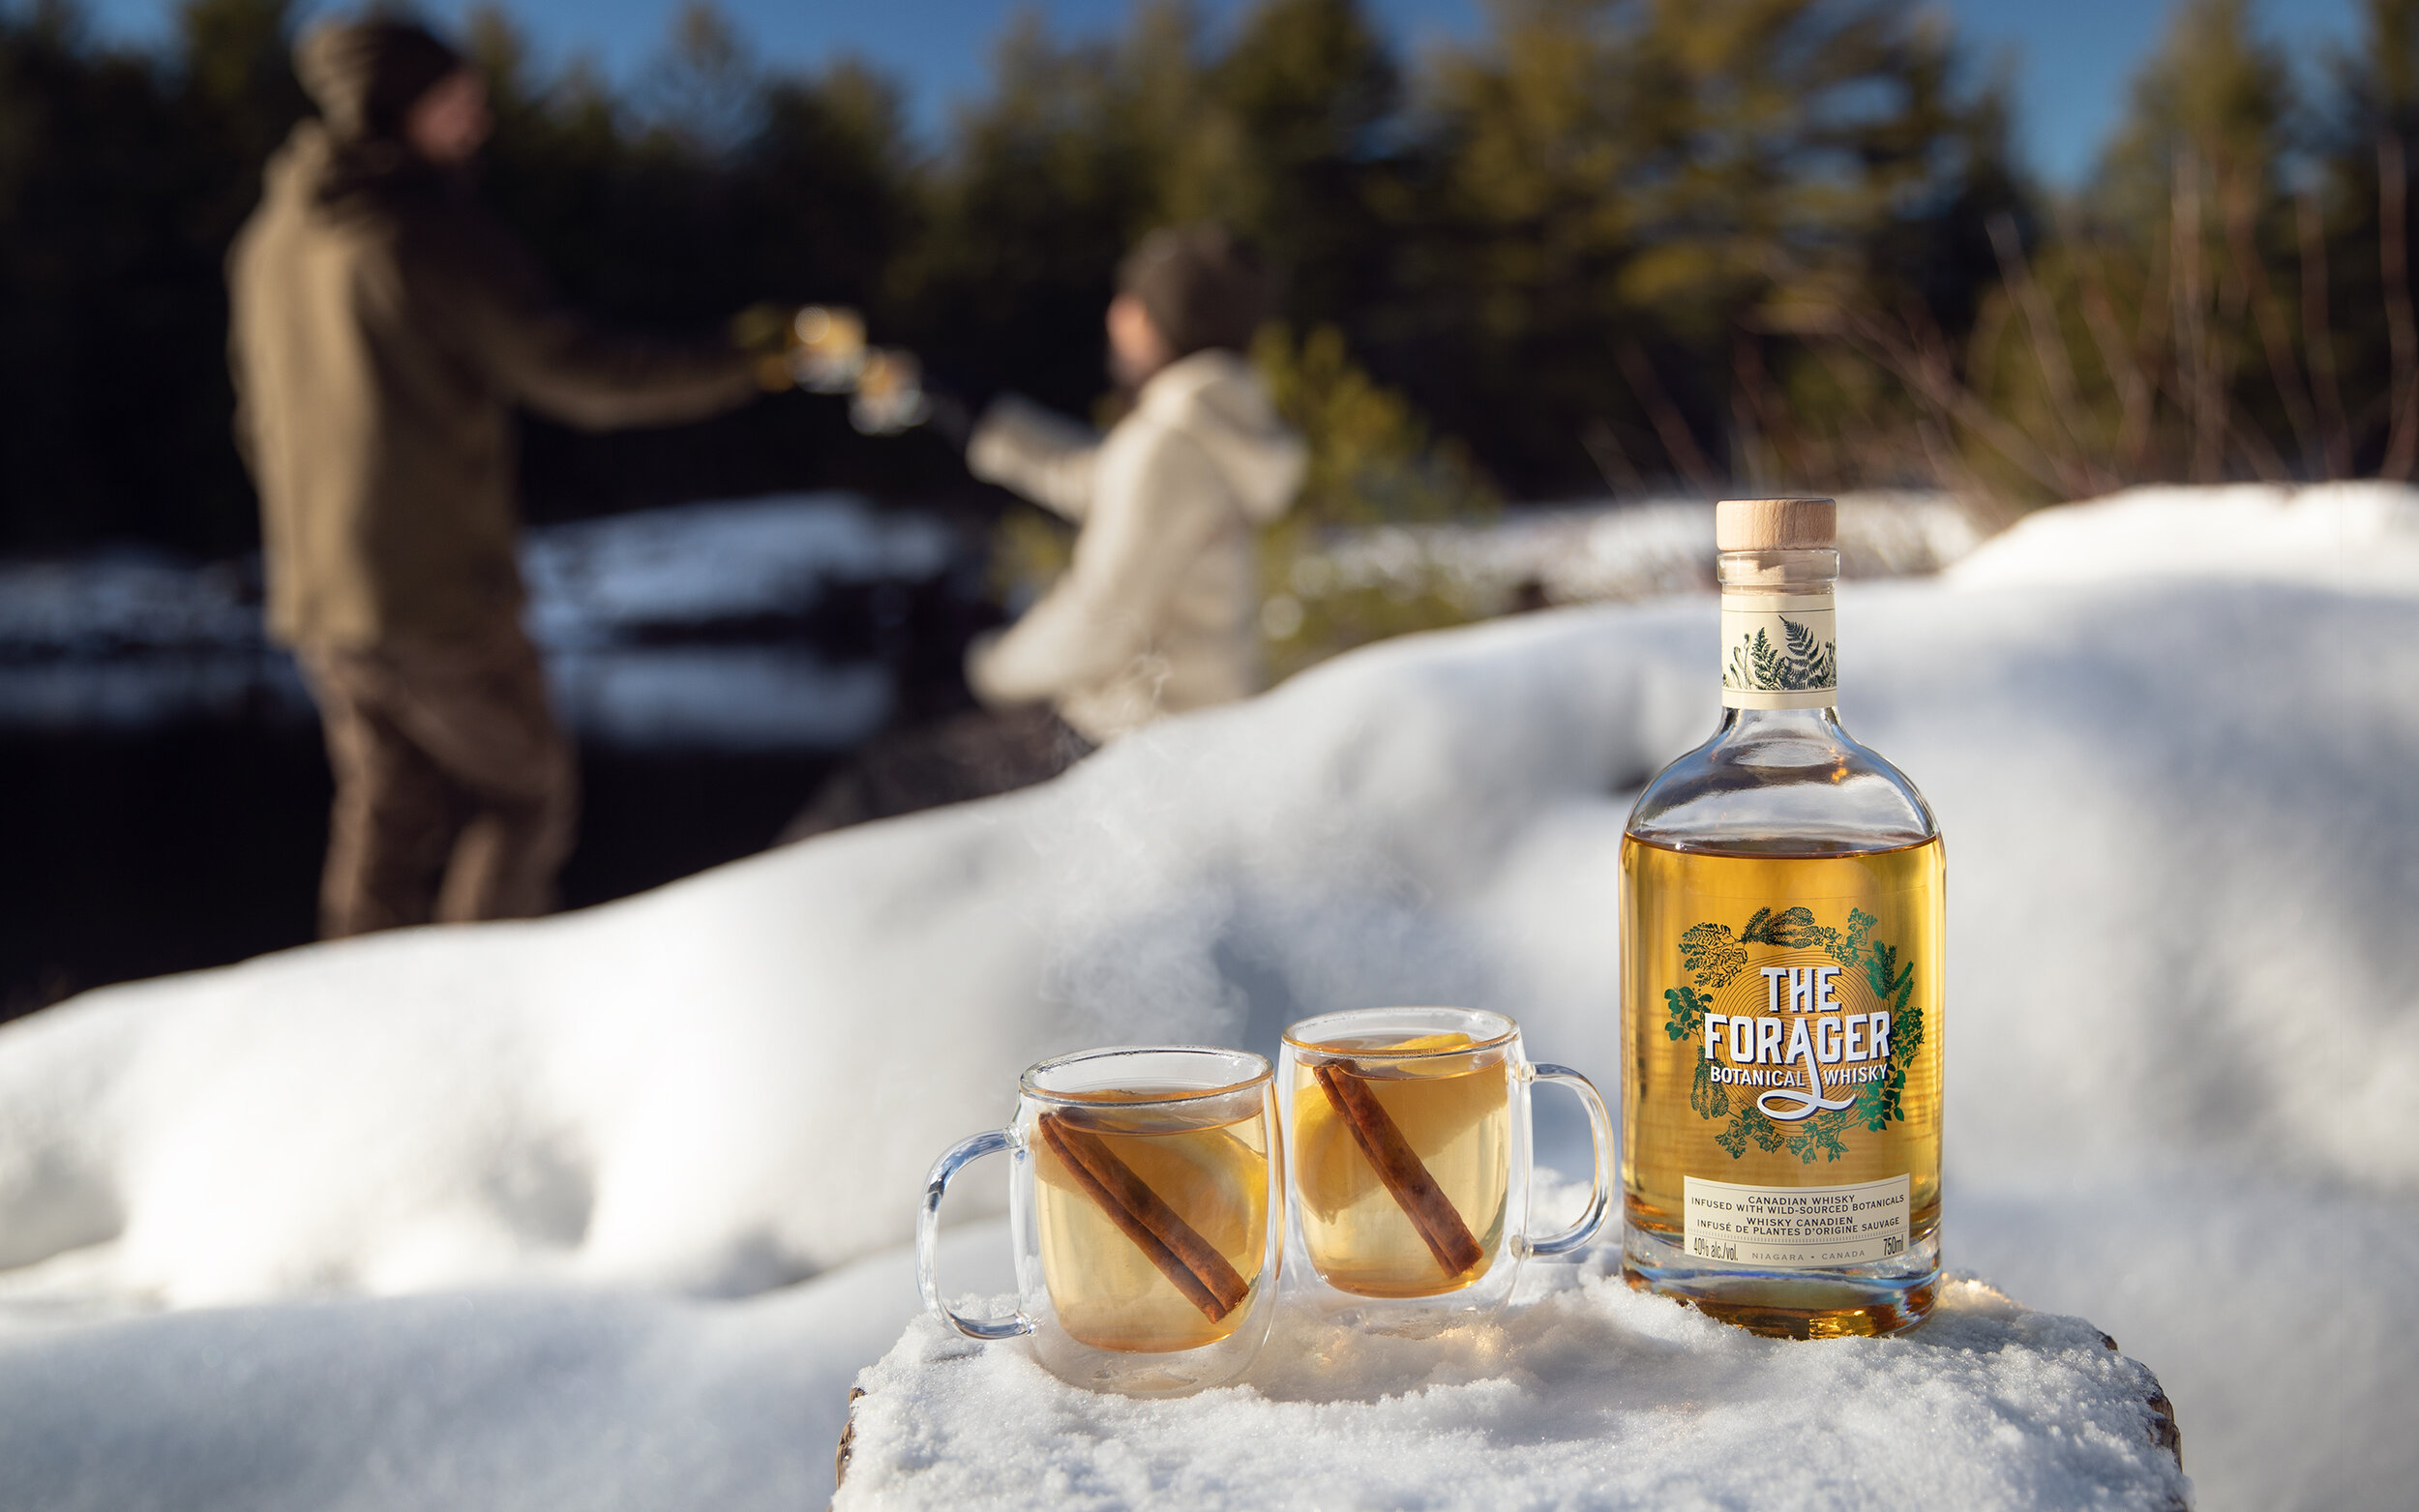 20-11-Trustin Timber -Forager Hot Toddy -Approved copy.jpg